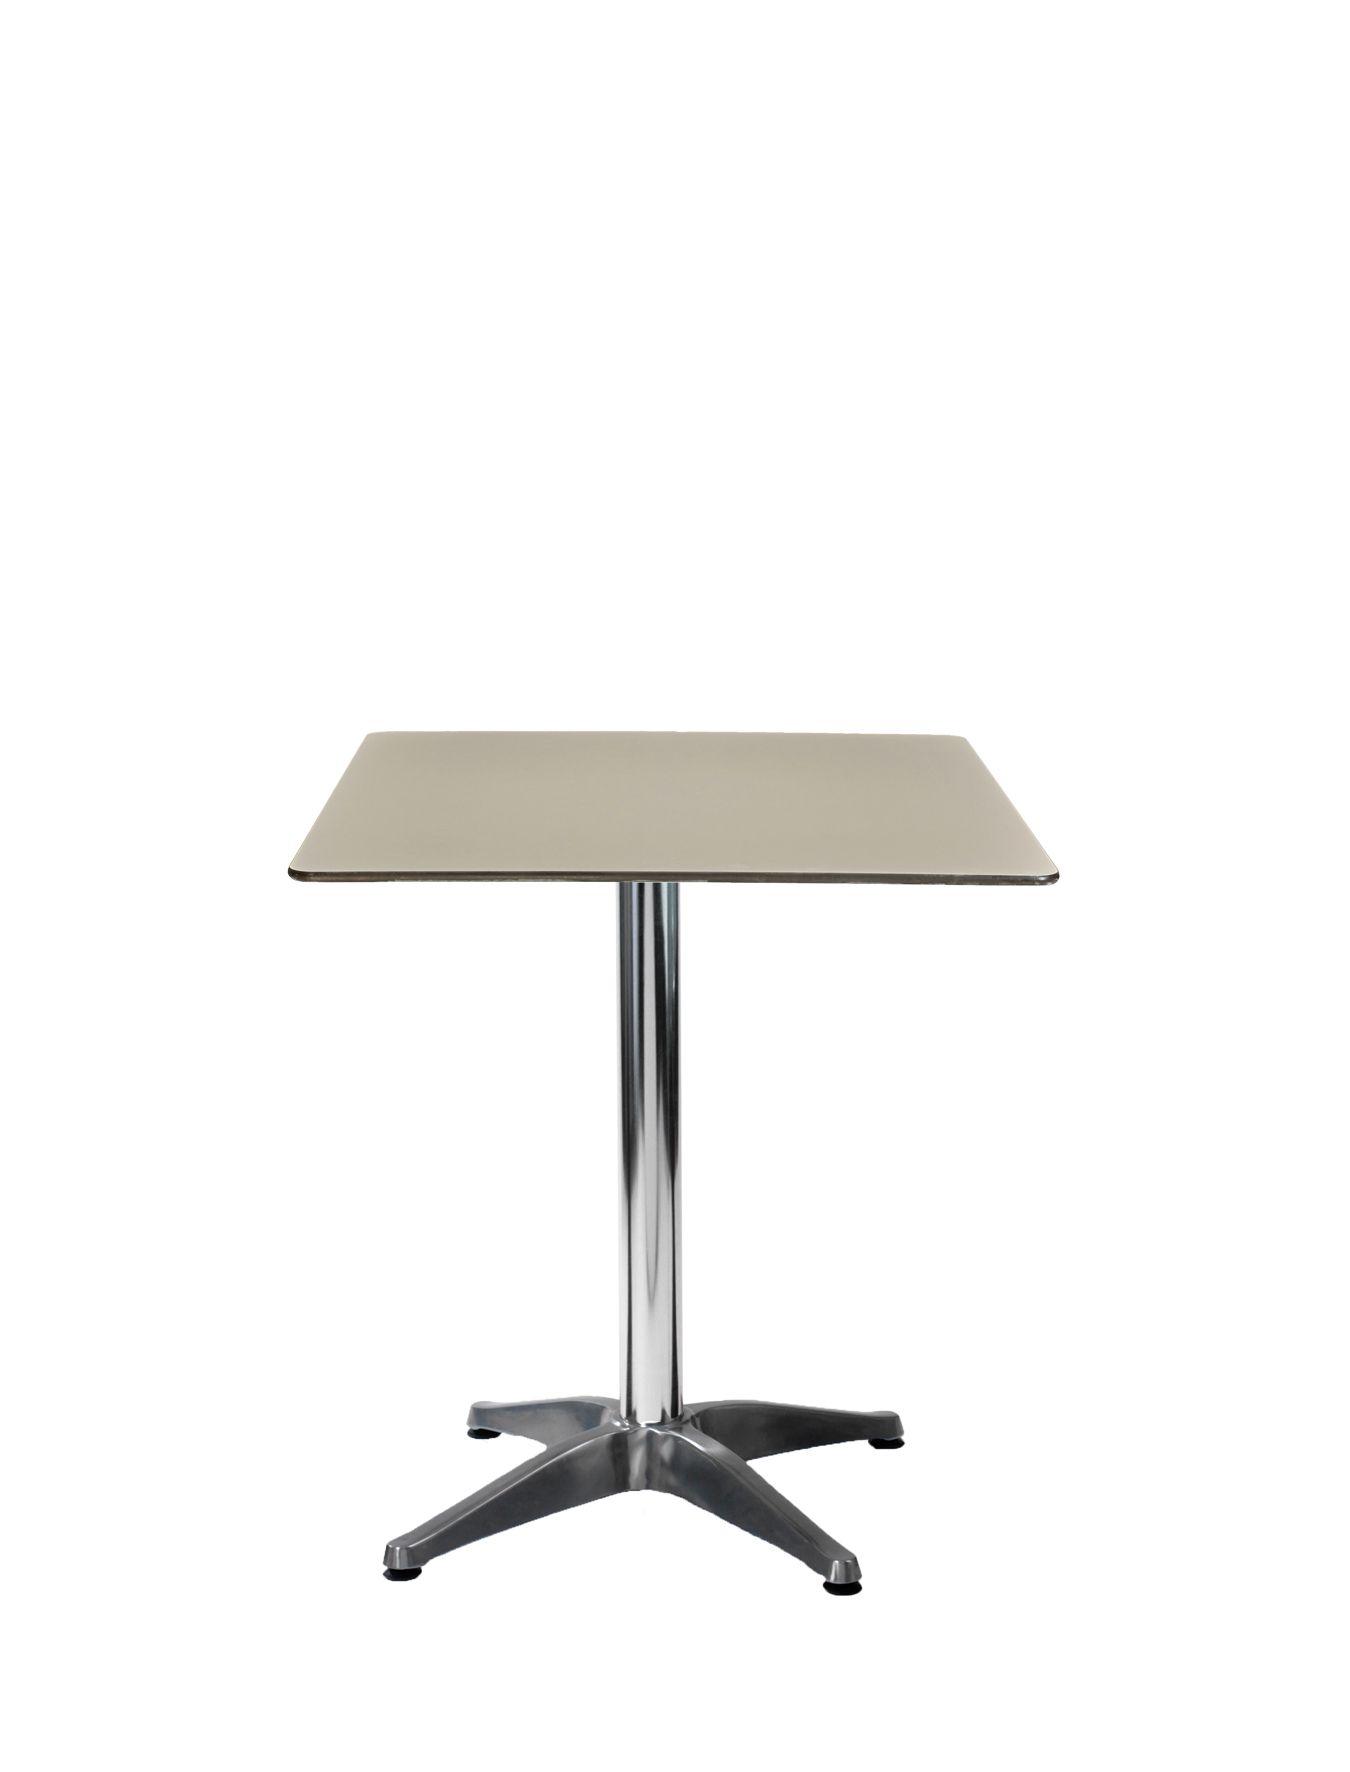 INDOOR TABLE&BASE -600X600 WHITE MARBLE EFFECT TABLE& BASE 2322